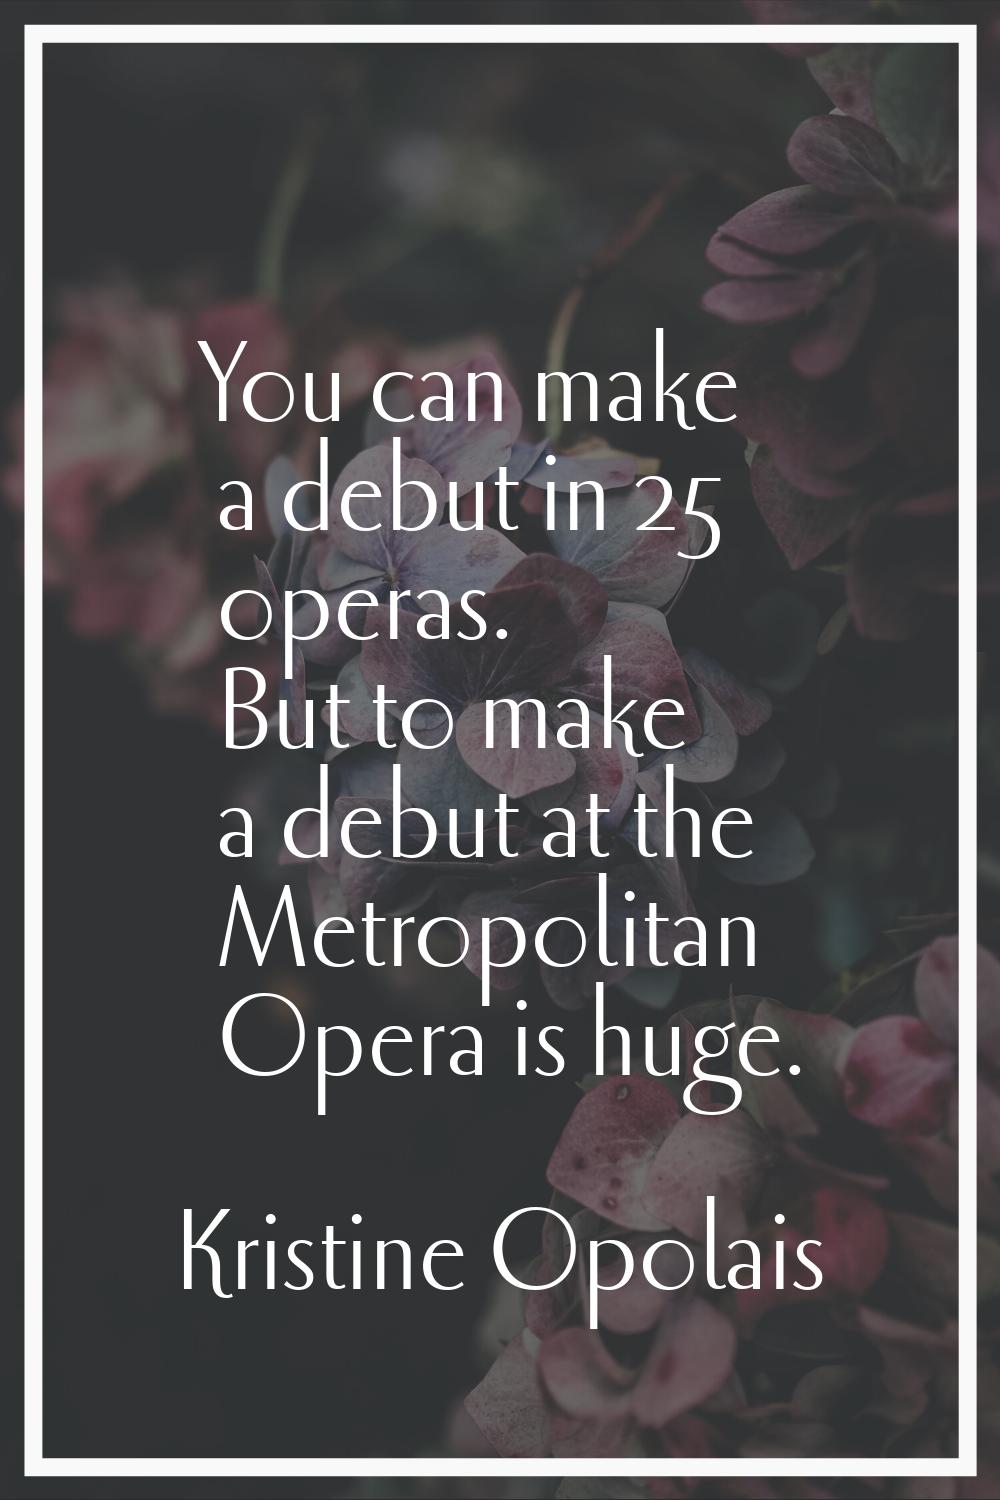 You can make a debut in 25 operas. But to make a debut at the Metropolitan Opera is huge.